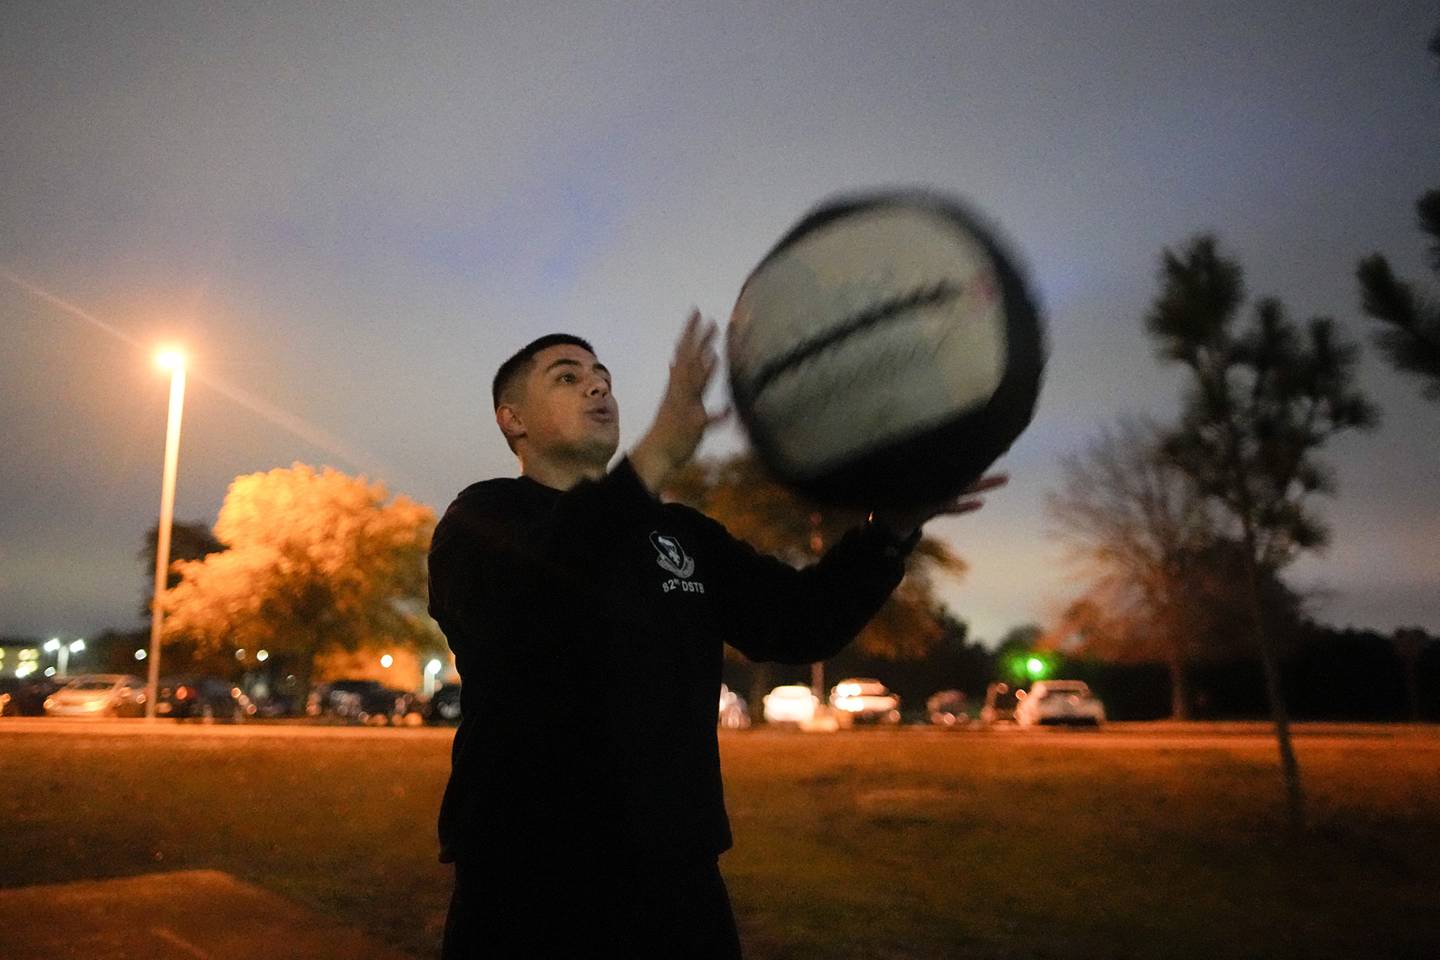 Army Staff Sgt. Daniel Murillo conducts physical training at Ft. Bragg on Wednesday, Jan. 18, 2023, in Fayetteville, N.C.